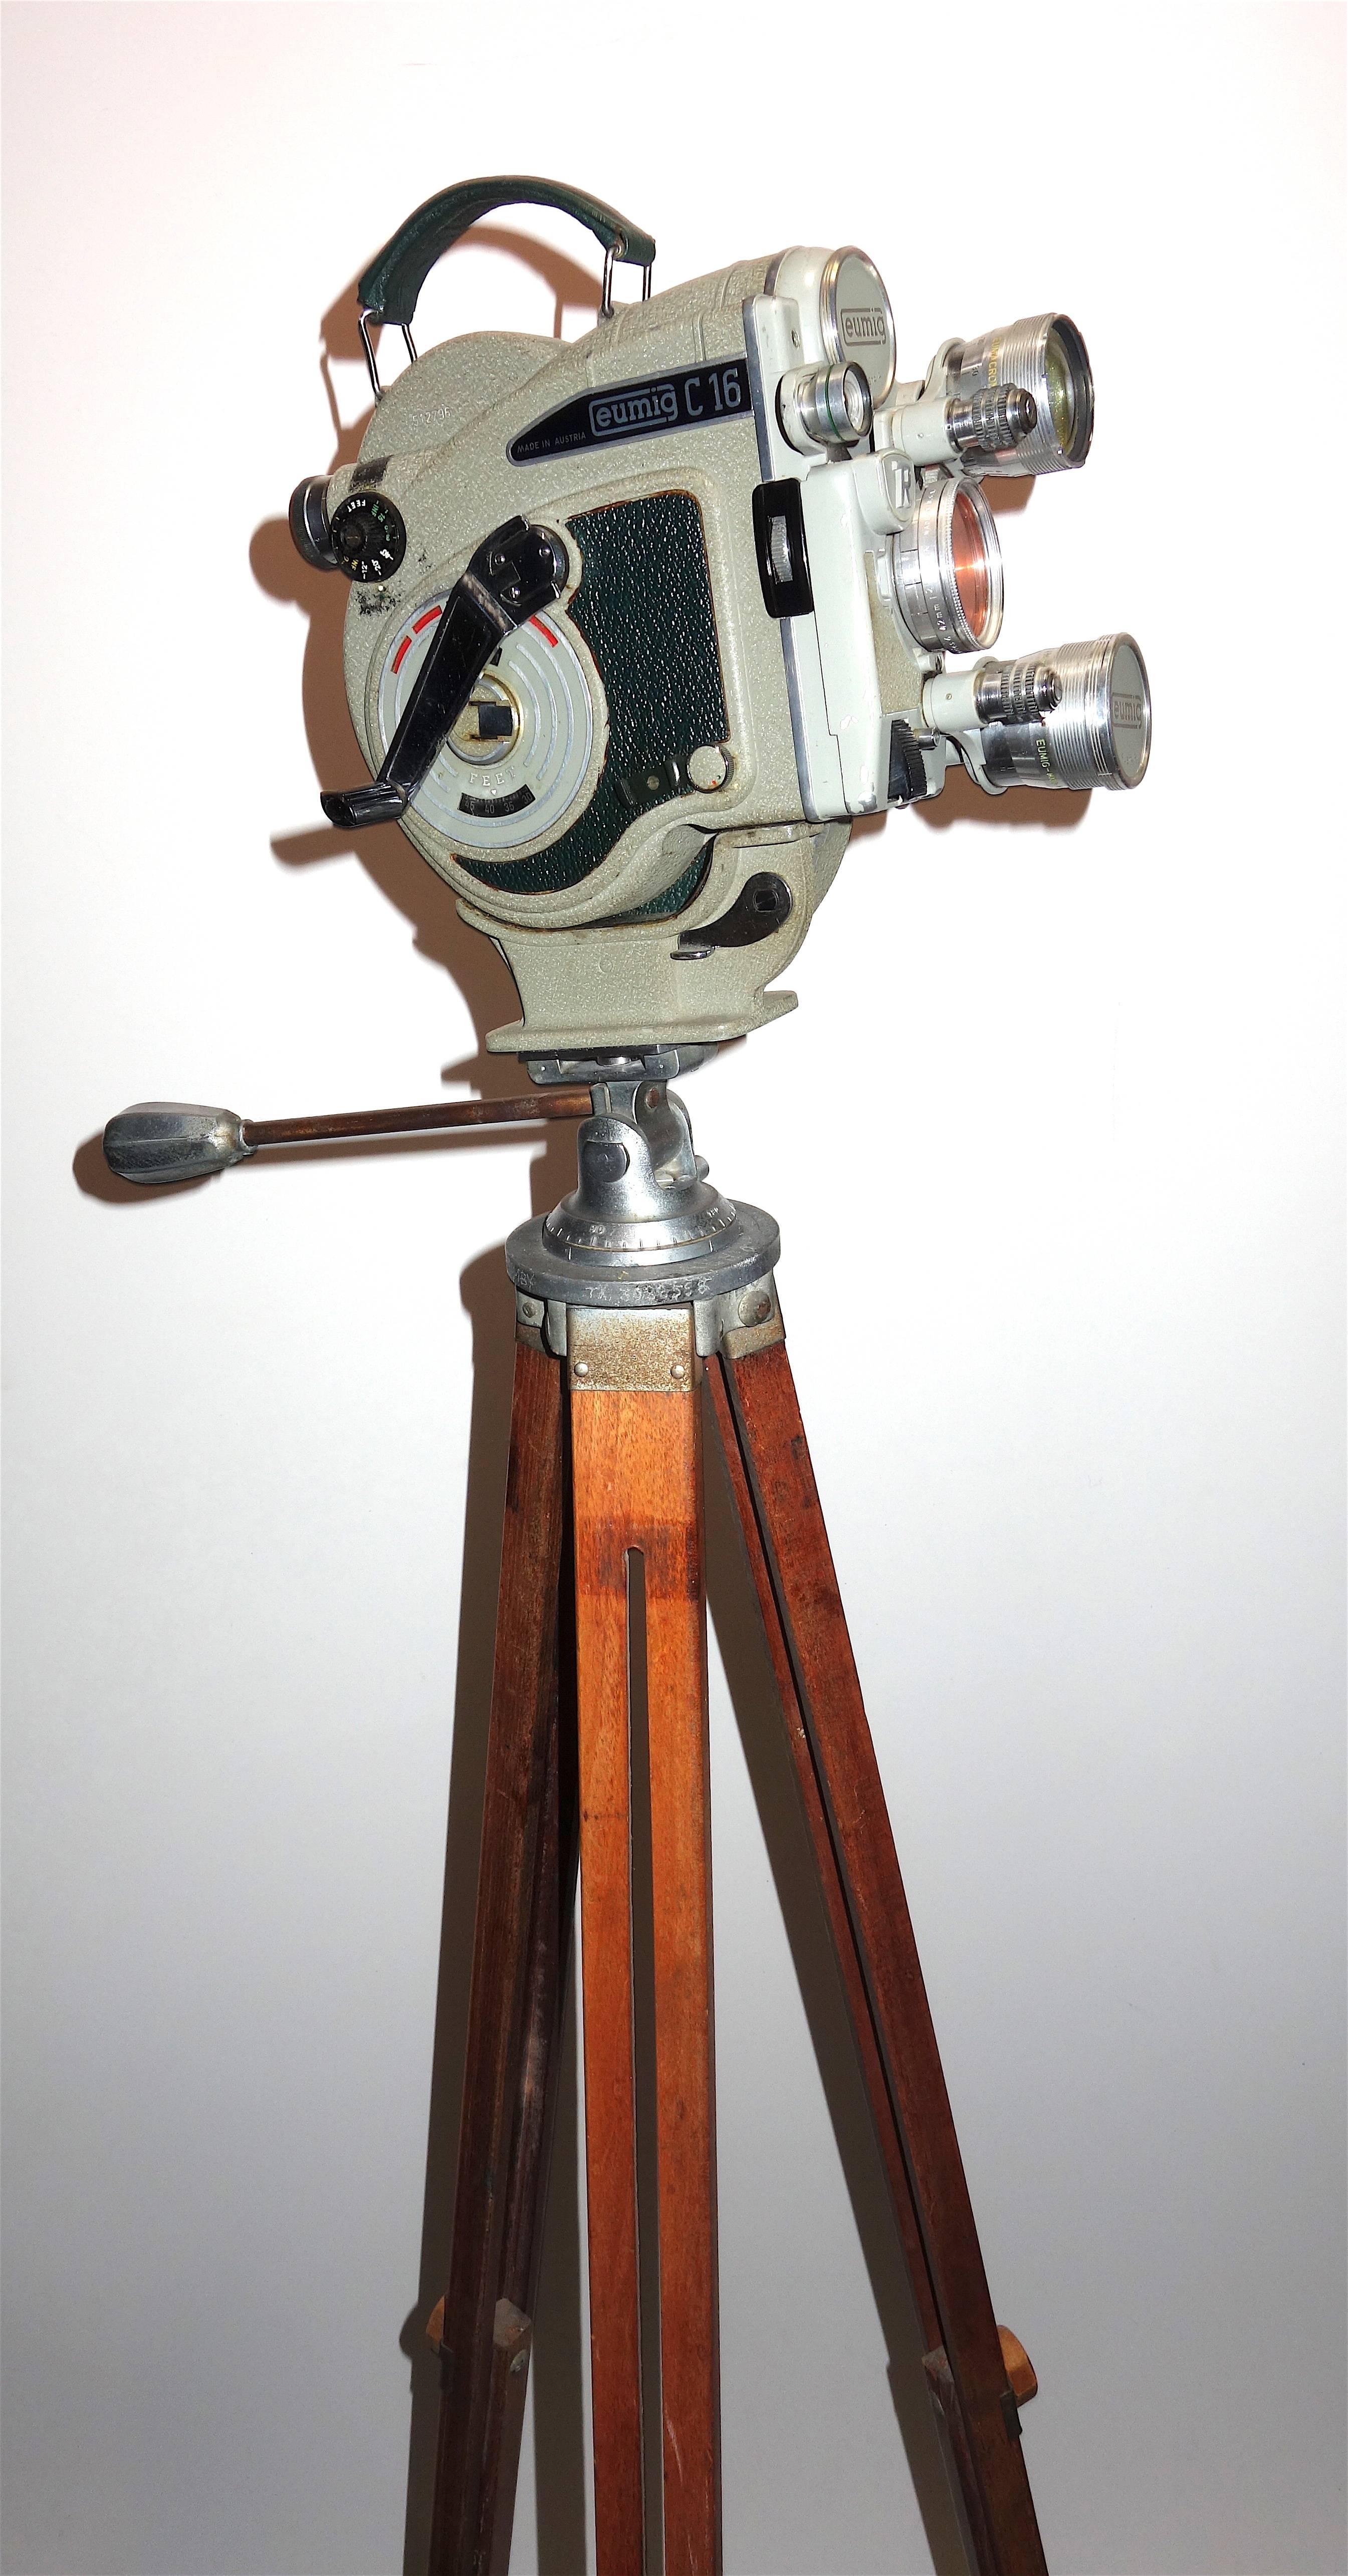 Submitted for your consideration is this rare Austrian made Eumig Cinema camera, circa 1956. Eumig was founded in the very early 20th century.
The supplied wooden tripod is a beautiful midcentury example. This model was Eumig's first attempt at a